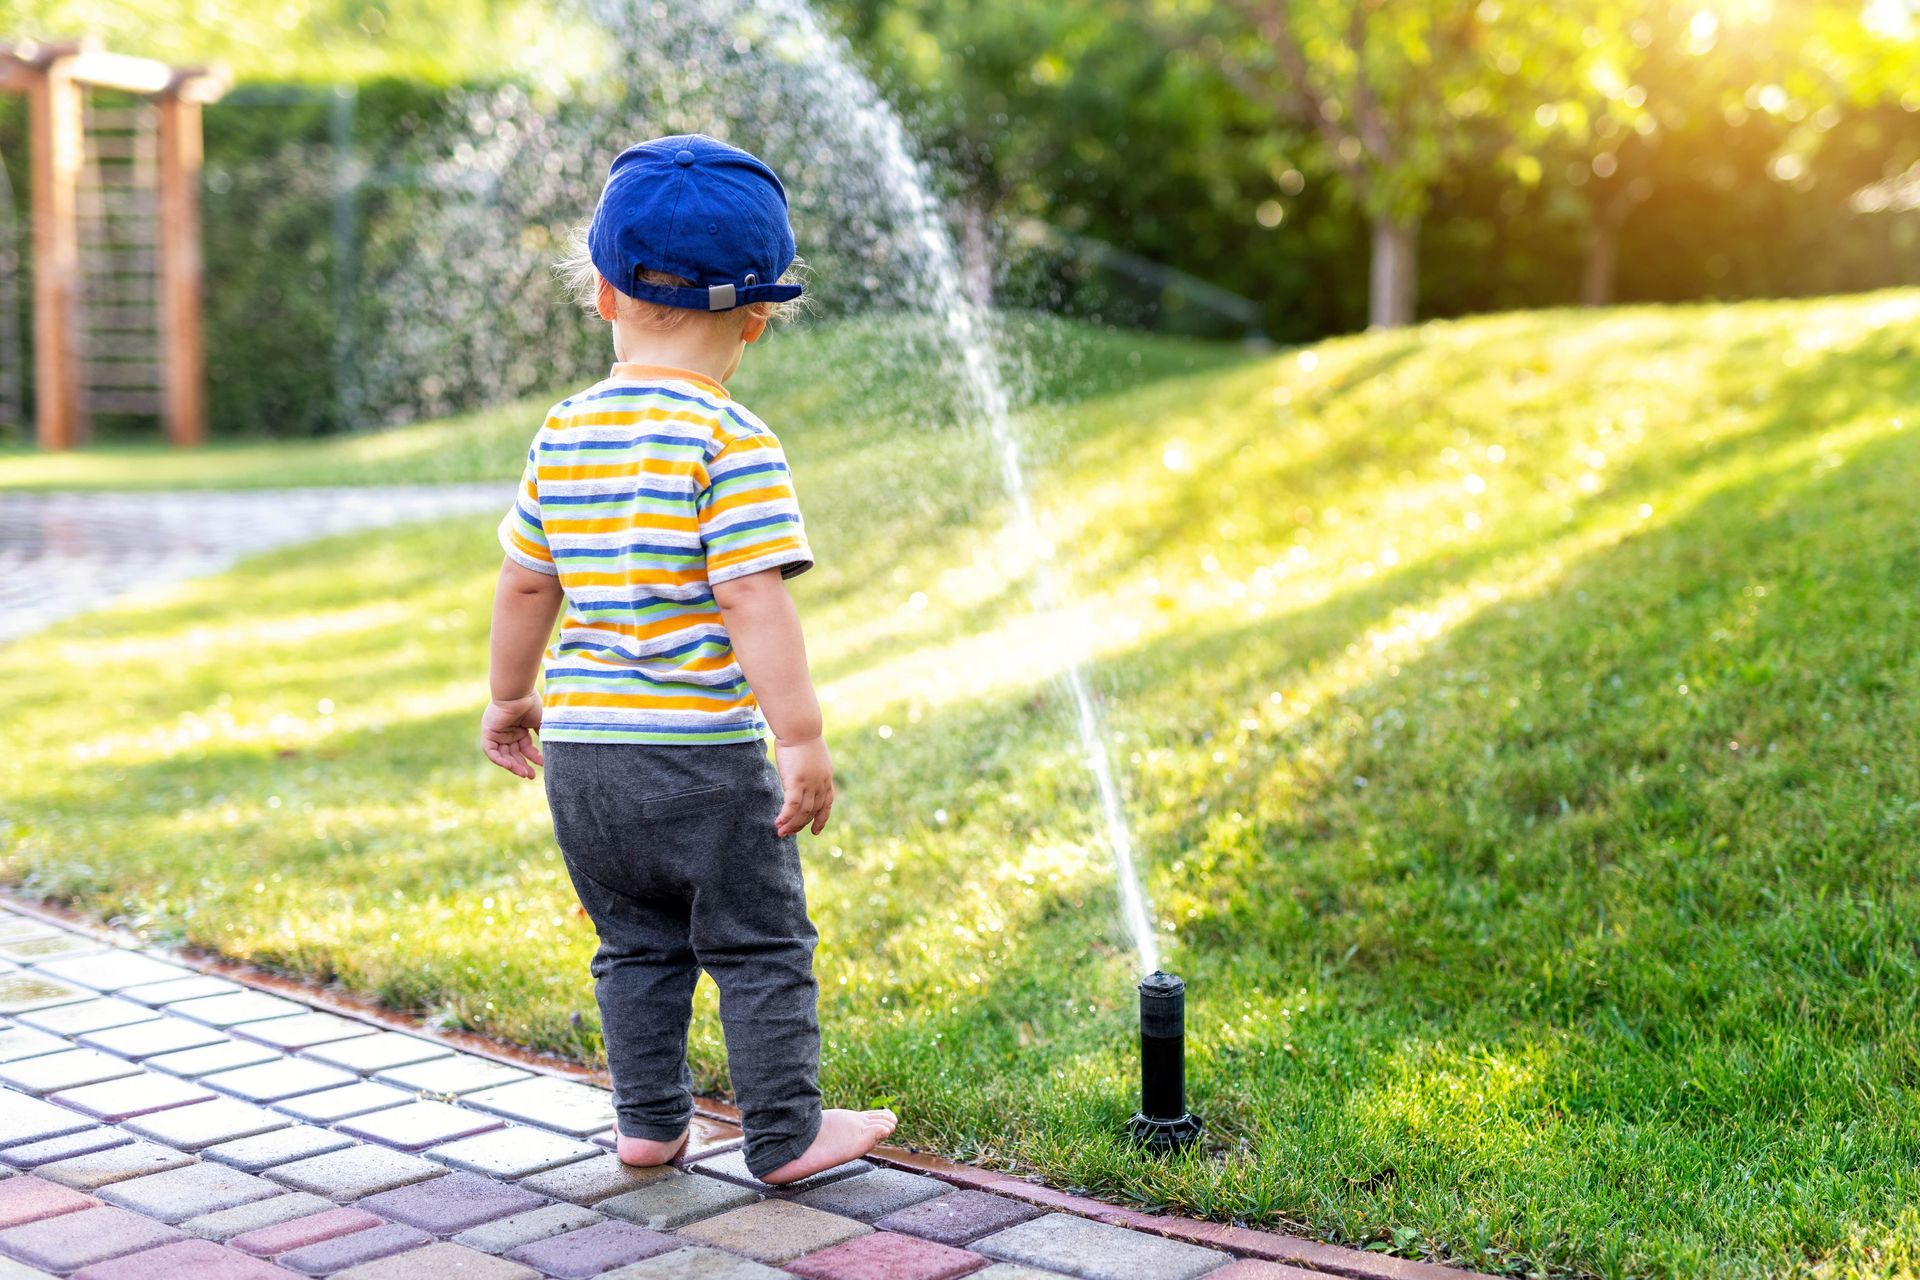 Young boy with blond hair running through florida lawn sprinkler system